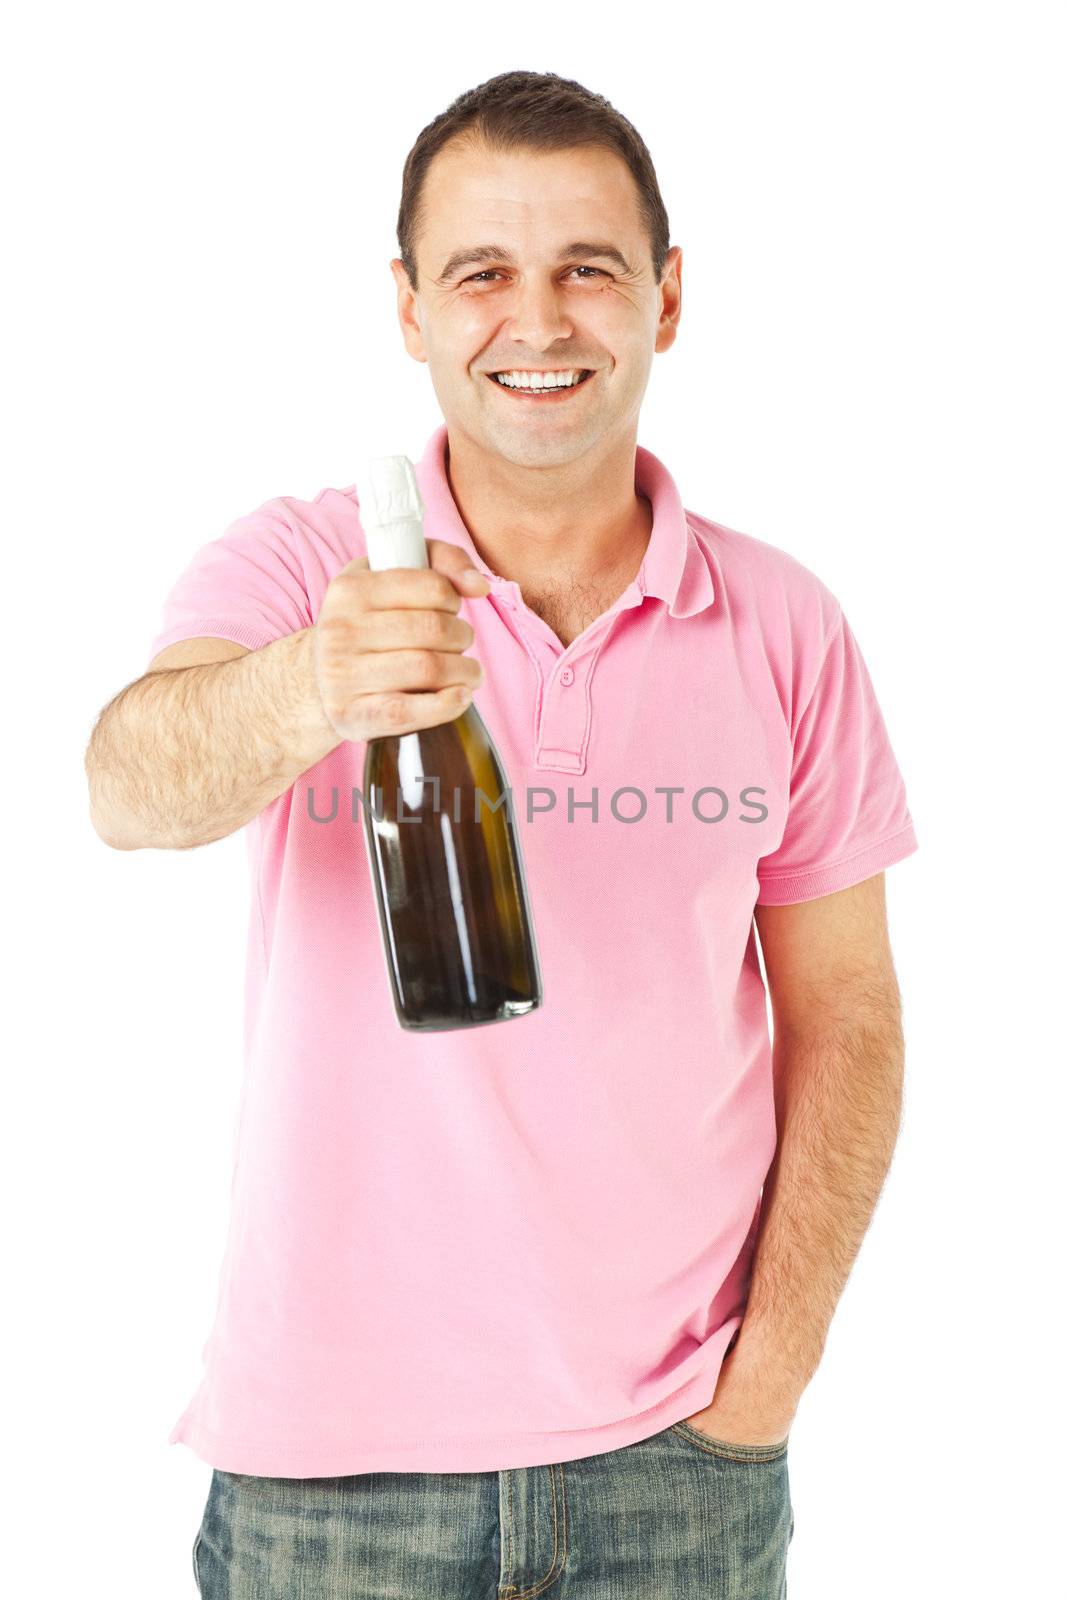 smiling casual male holding bottle of champagne, isolated on white